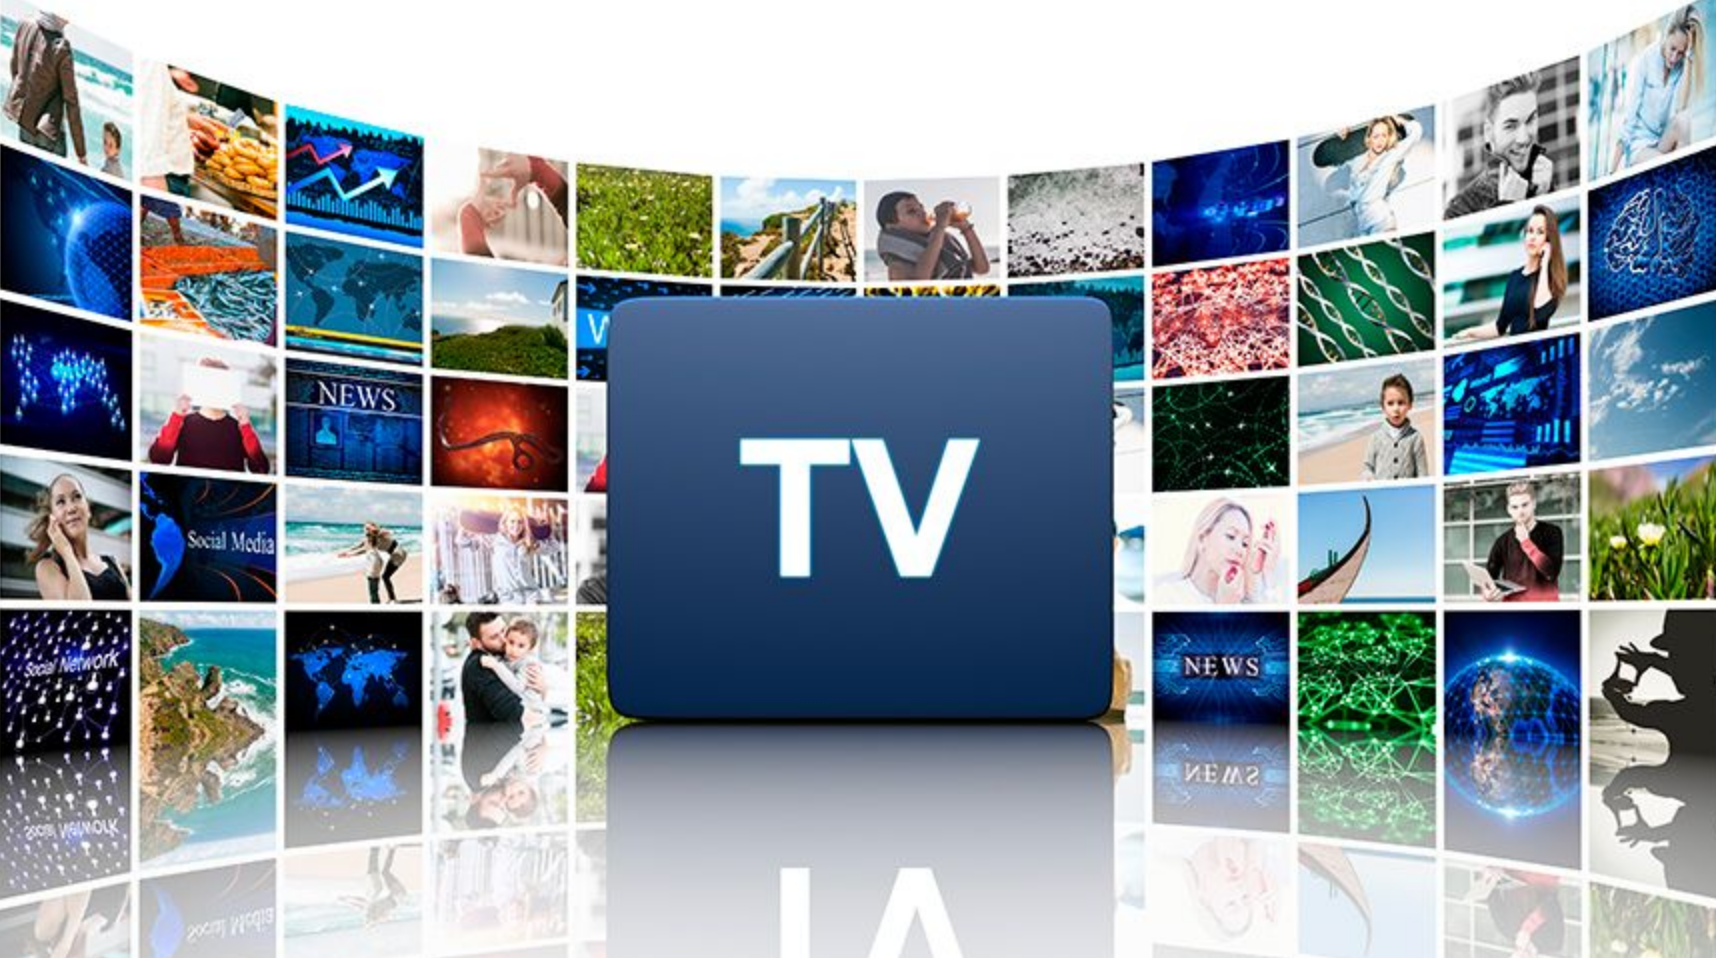 Here are some of the features of the IPTV service provider